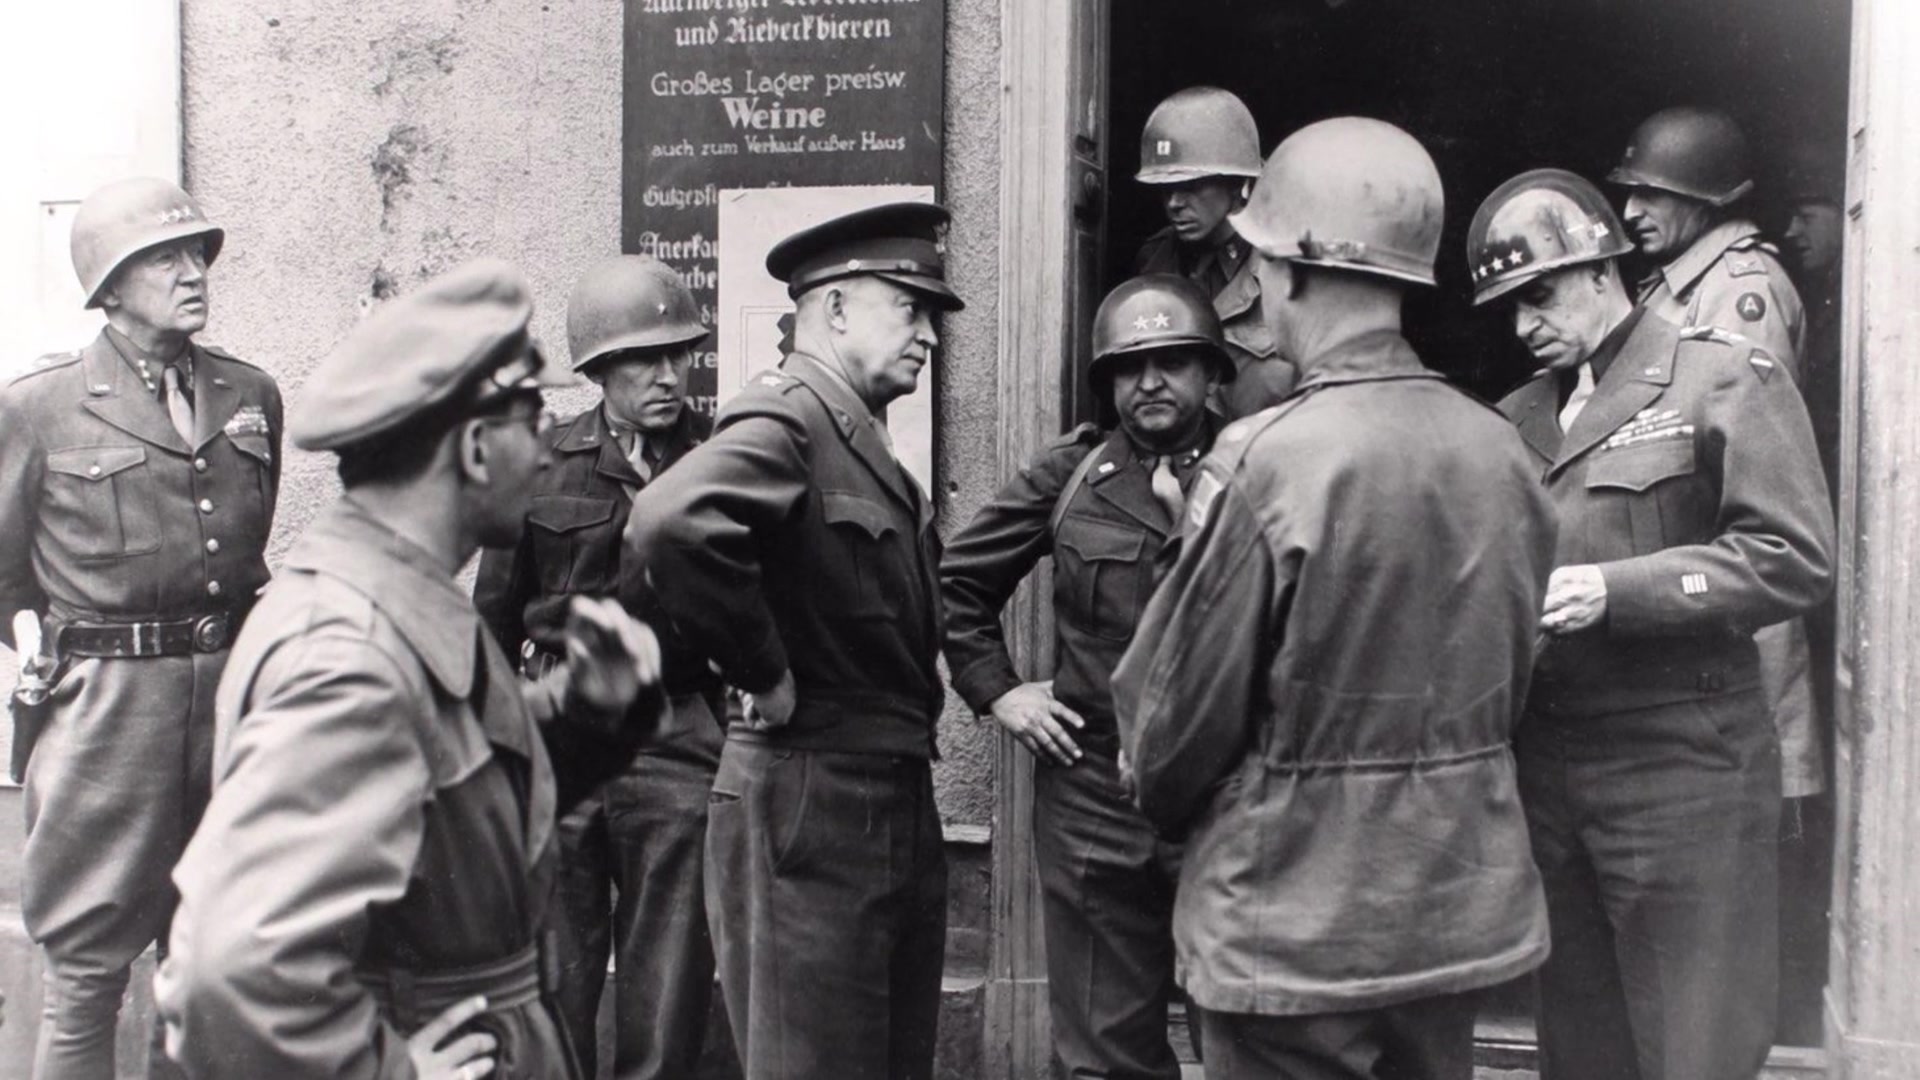 This video highlights the 80th Infantry Division's heroic actions during World War II.